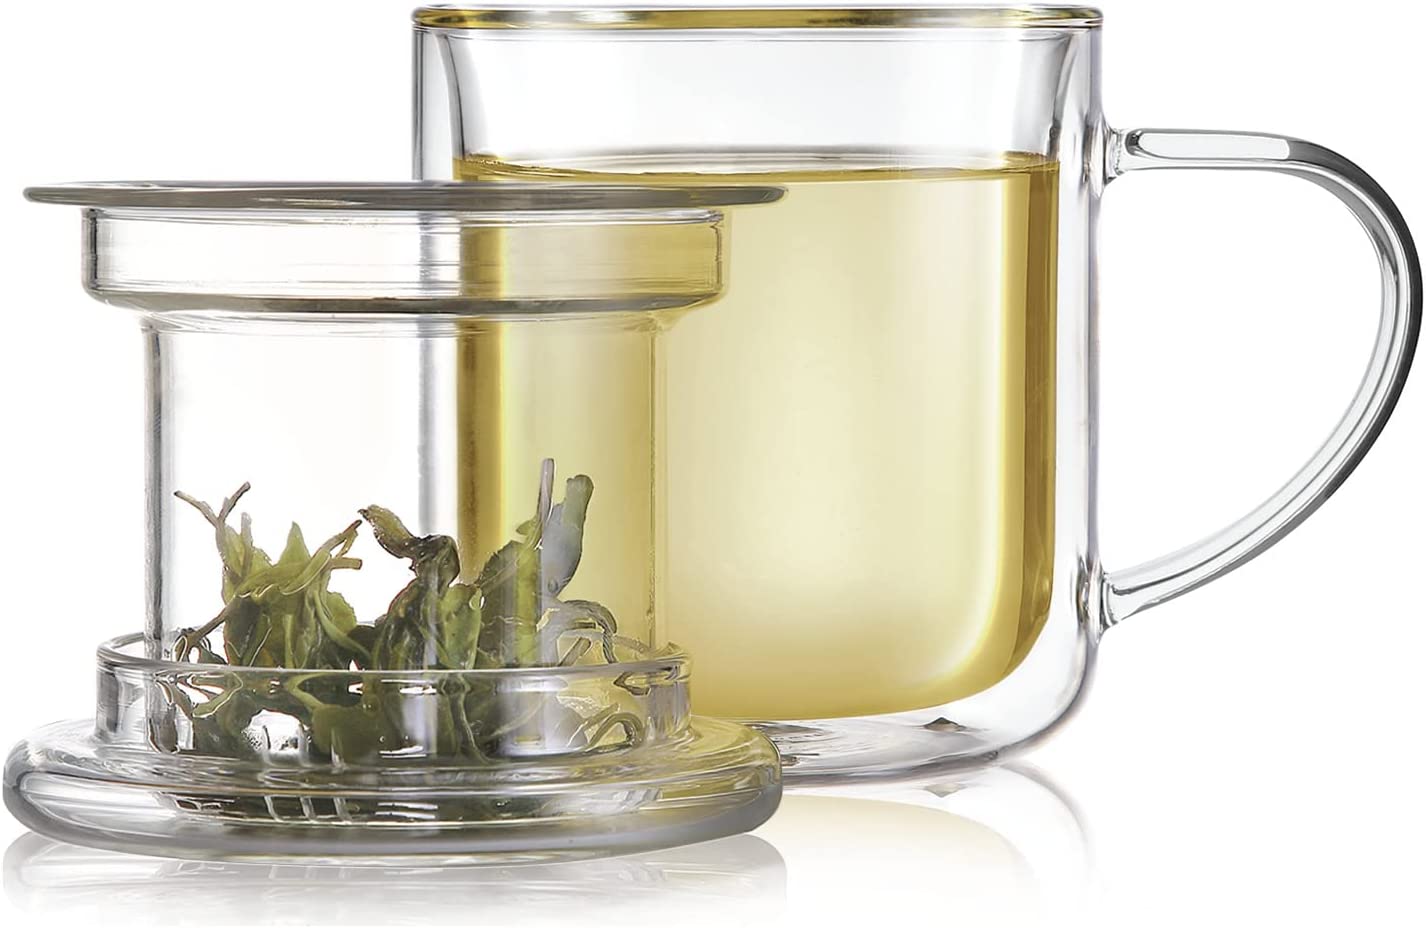 Dorsaer Glass Tea Mugs - 16.9oz Glass Tea Cup with Infuser and Lid for Tea Steeping at Home and Office. Larger Glass Tea Cups